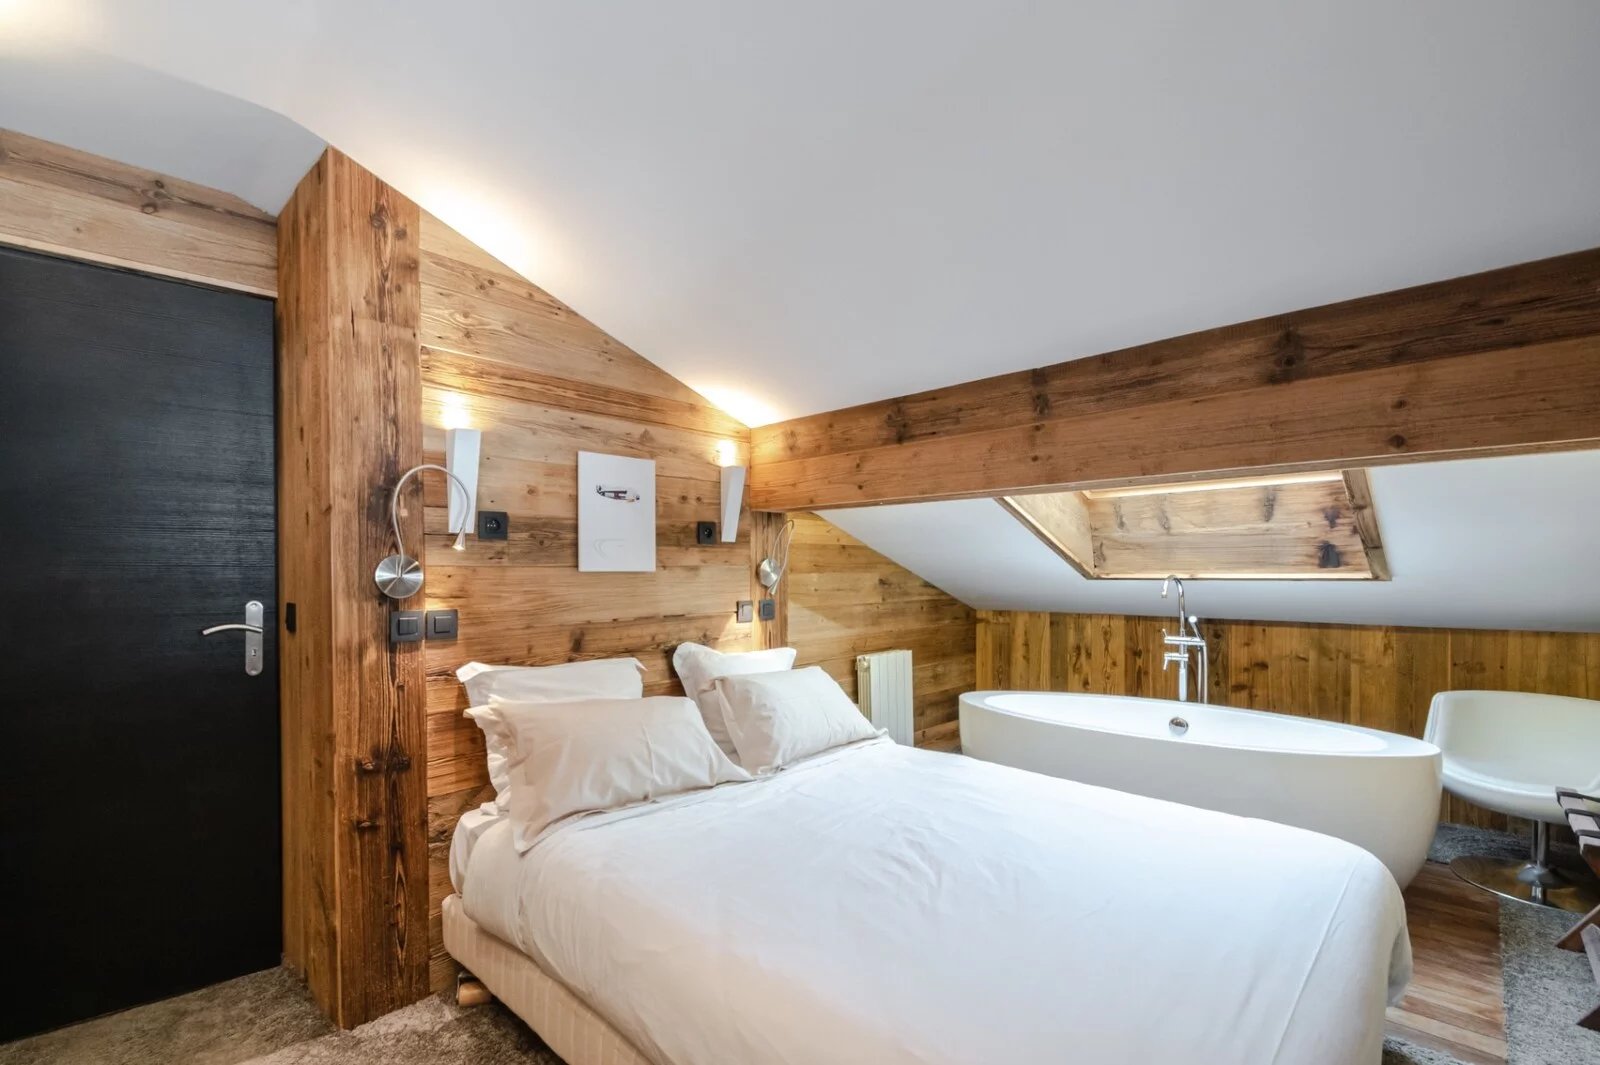 3 bedrooms apartment in Les Grands Montets